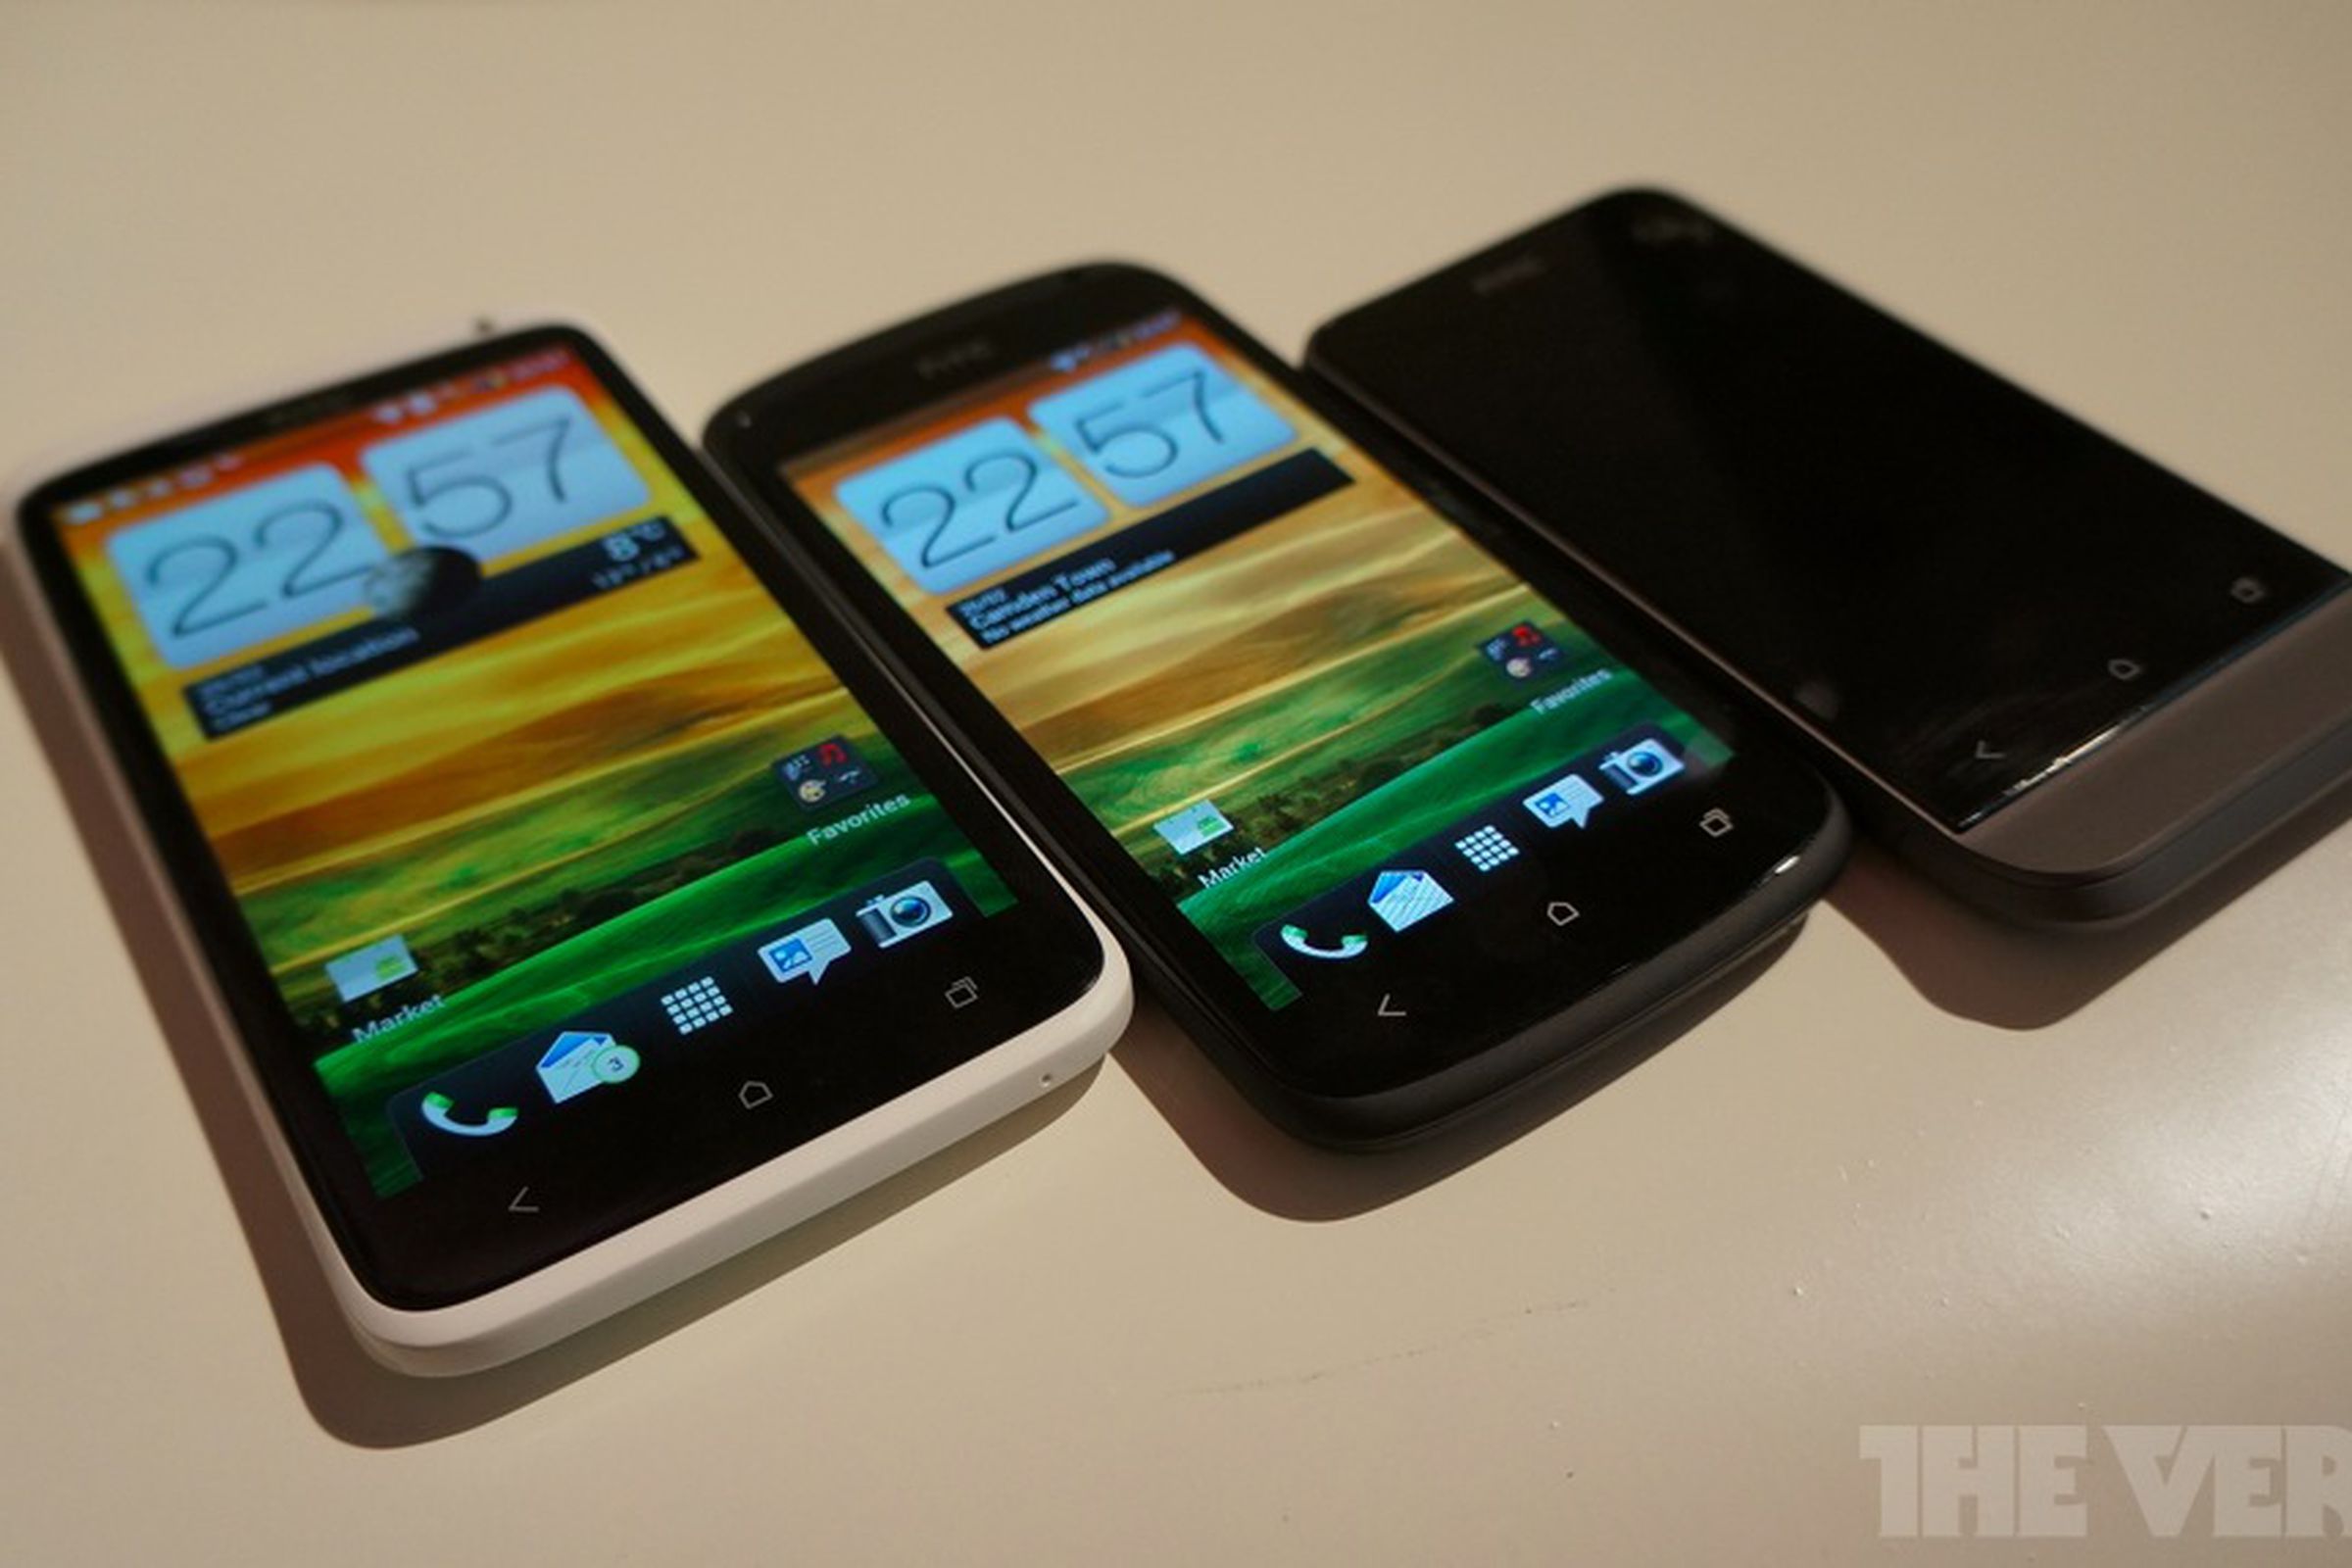 Gallery Photo: HTC One Series hands-on photos